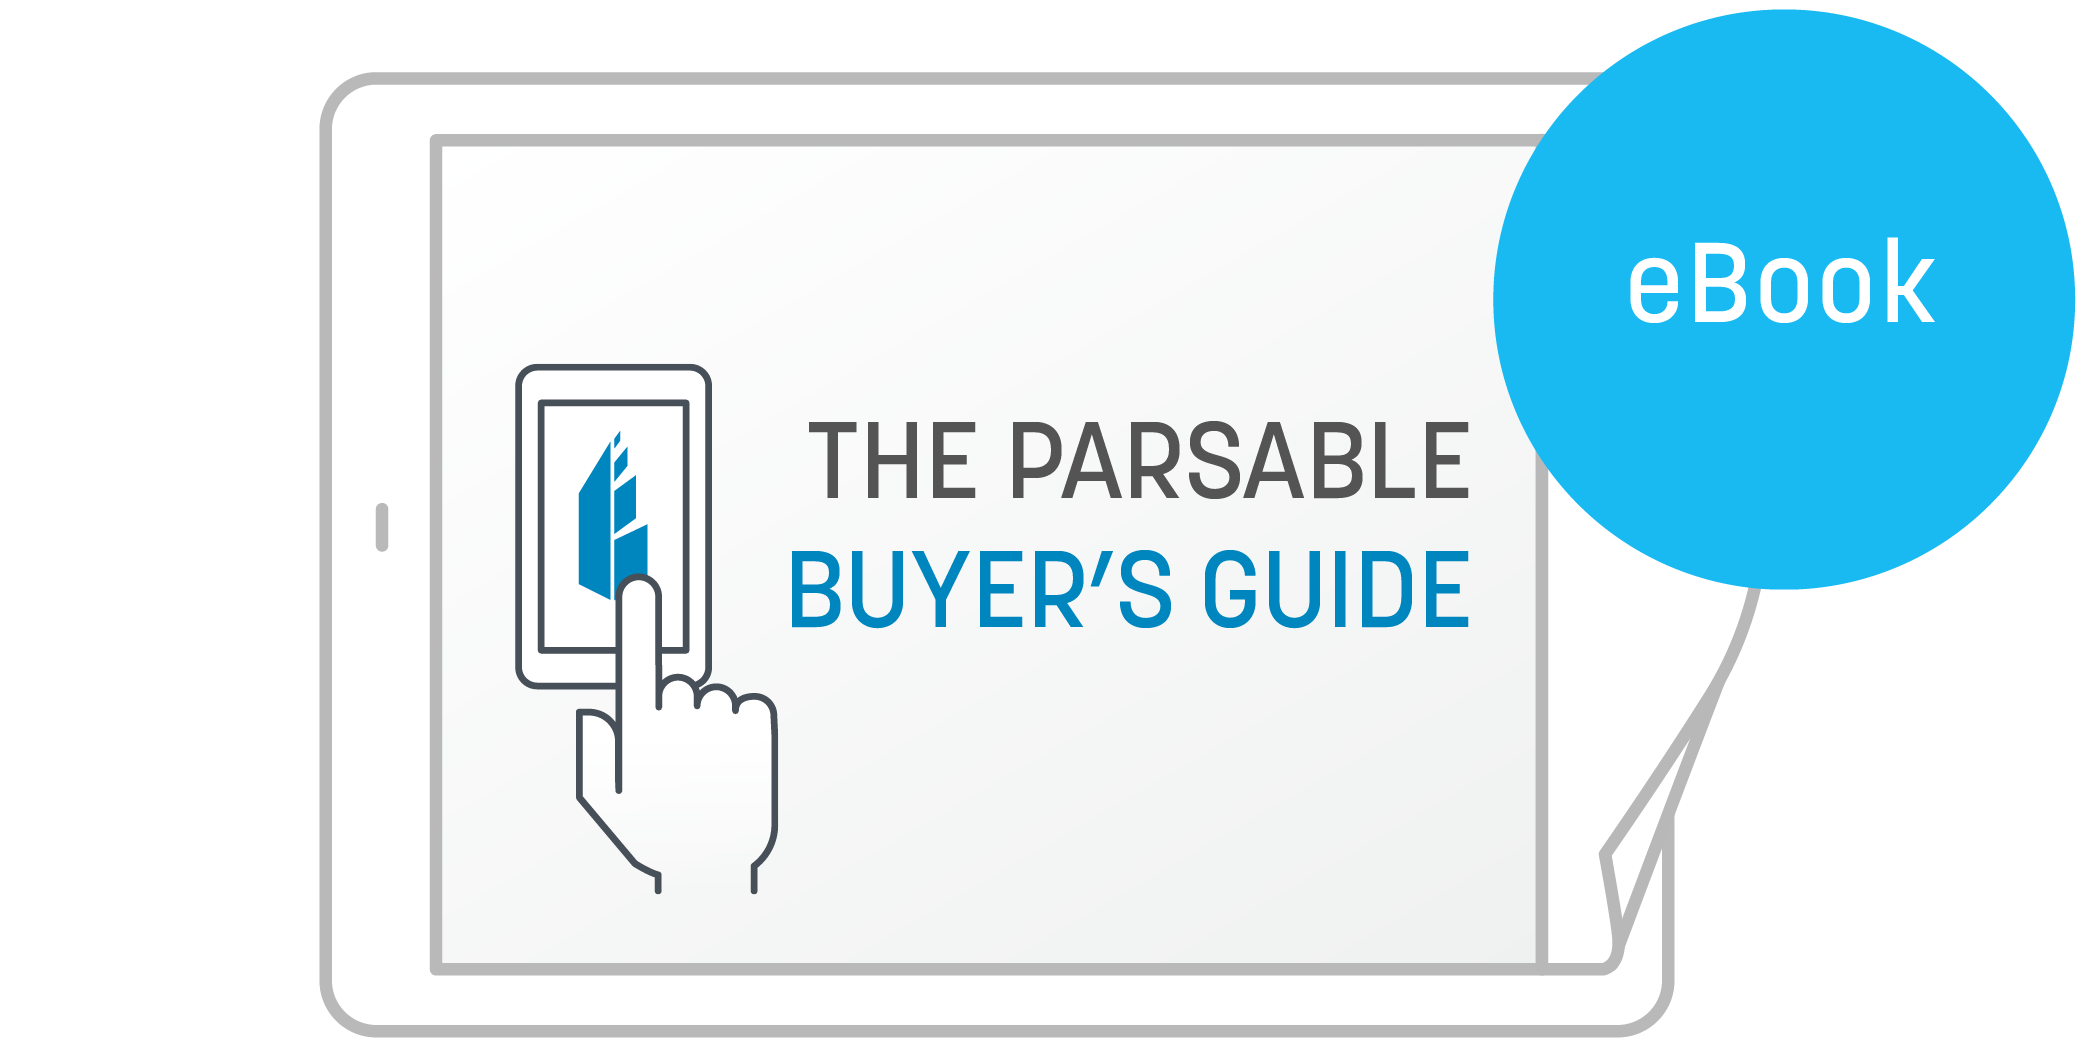 View the Parsable Buyers Guide